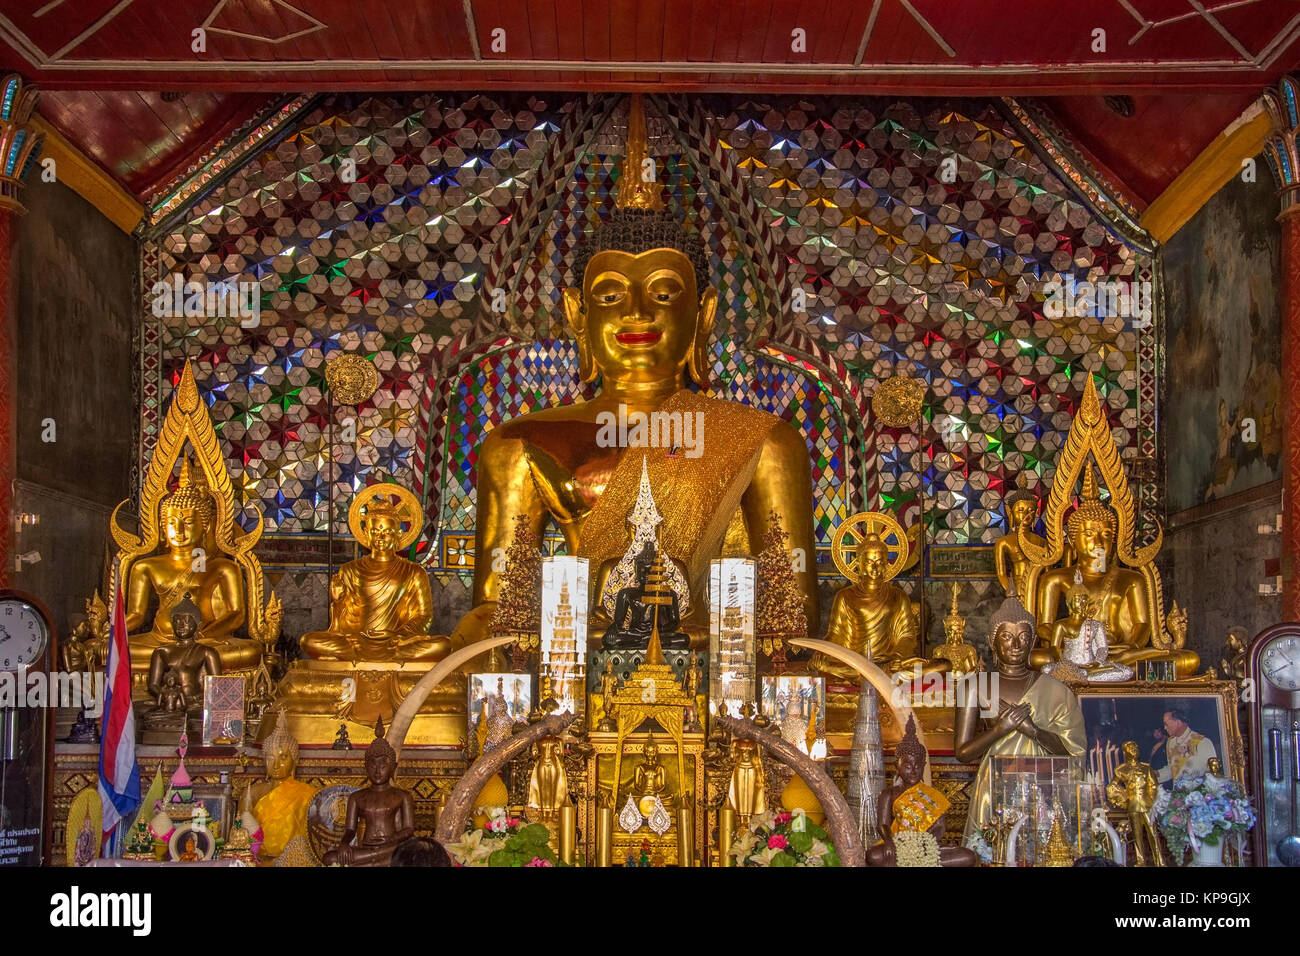 Buddha Images in the Doi Suthep Buddhist Temple near Chiang Mai in northern Thailand. Stock Photo